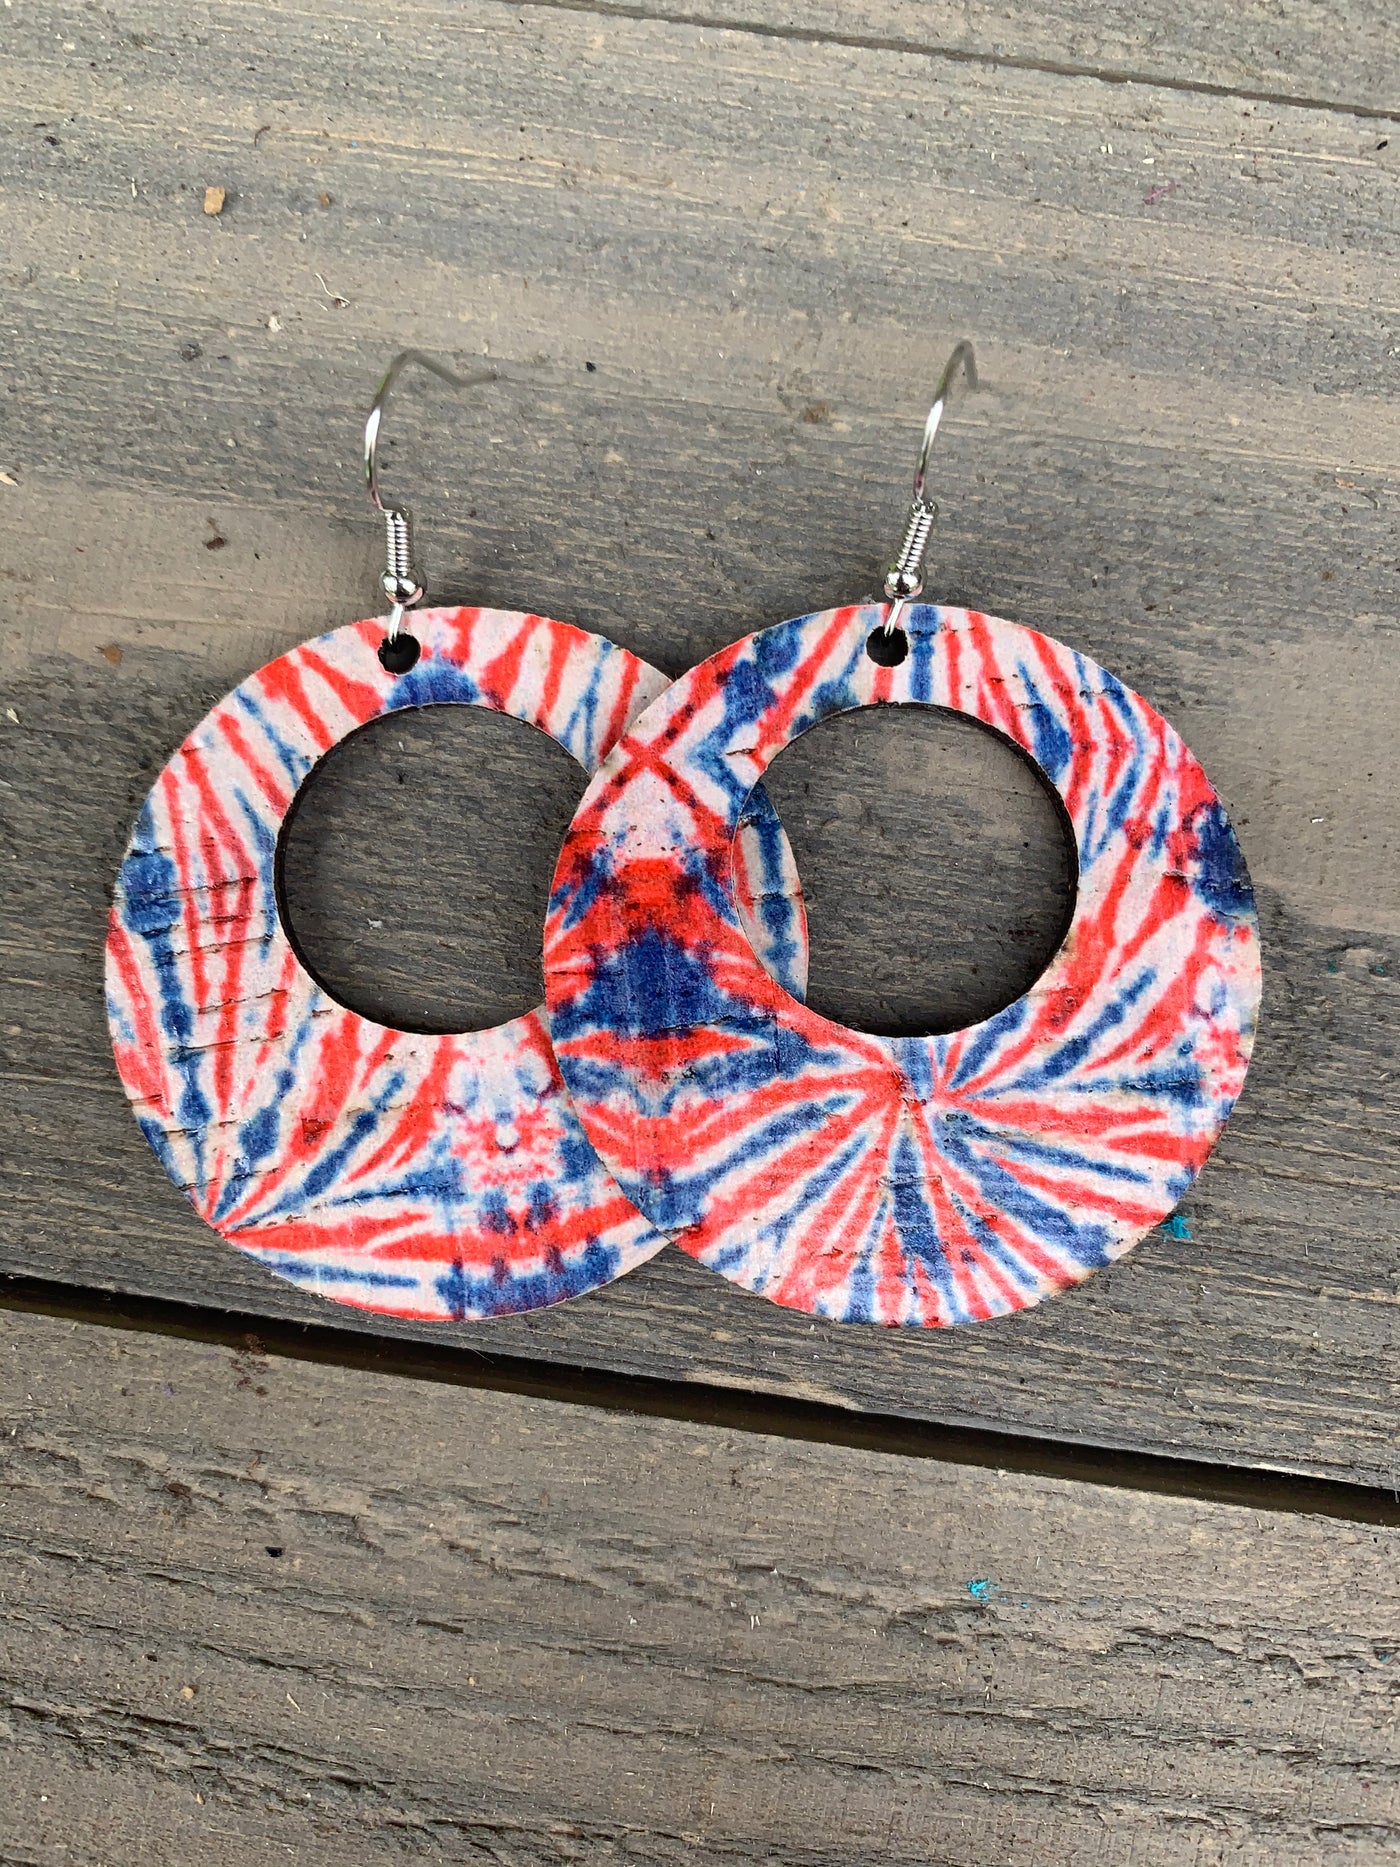 Red White and Blue Tie Dye Cork Hoop Earring - Jill's Jewels | Unique, Handcrafted, Trendy, And Fun Jewelry